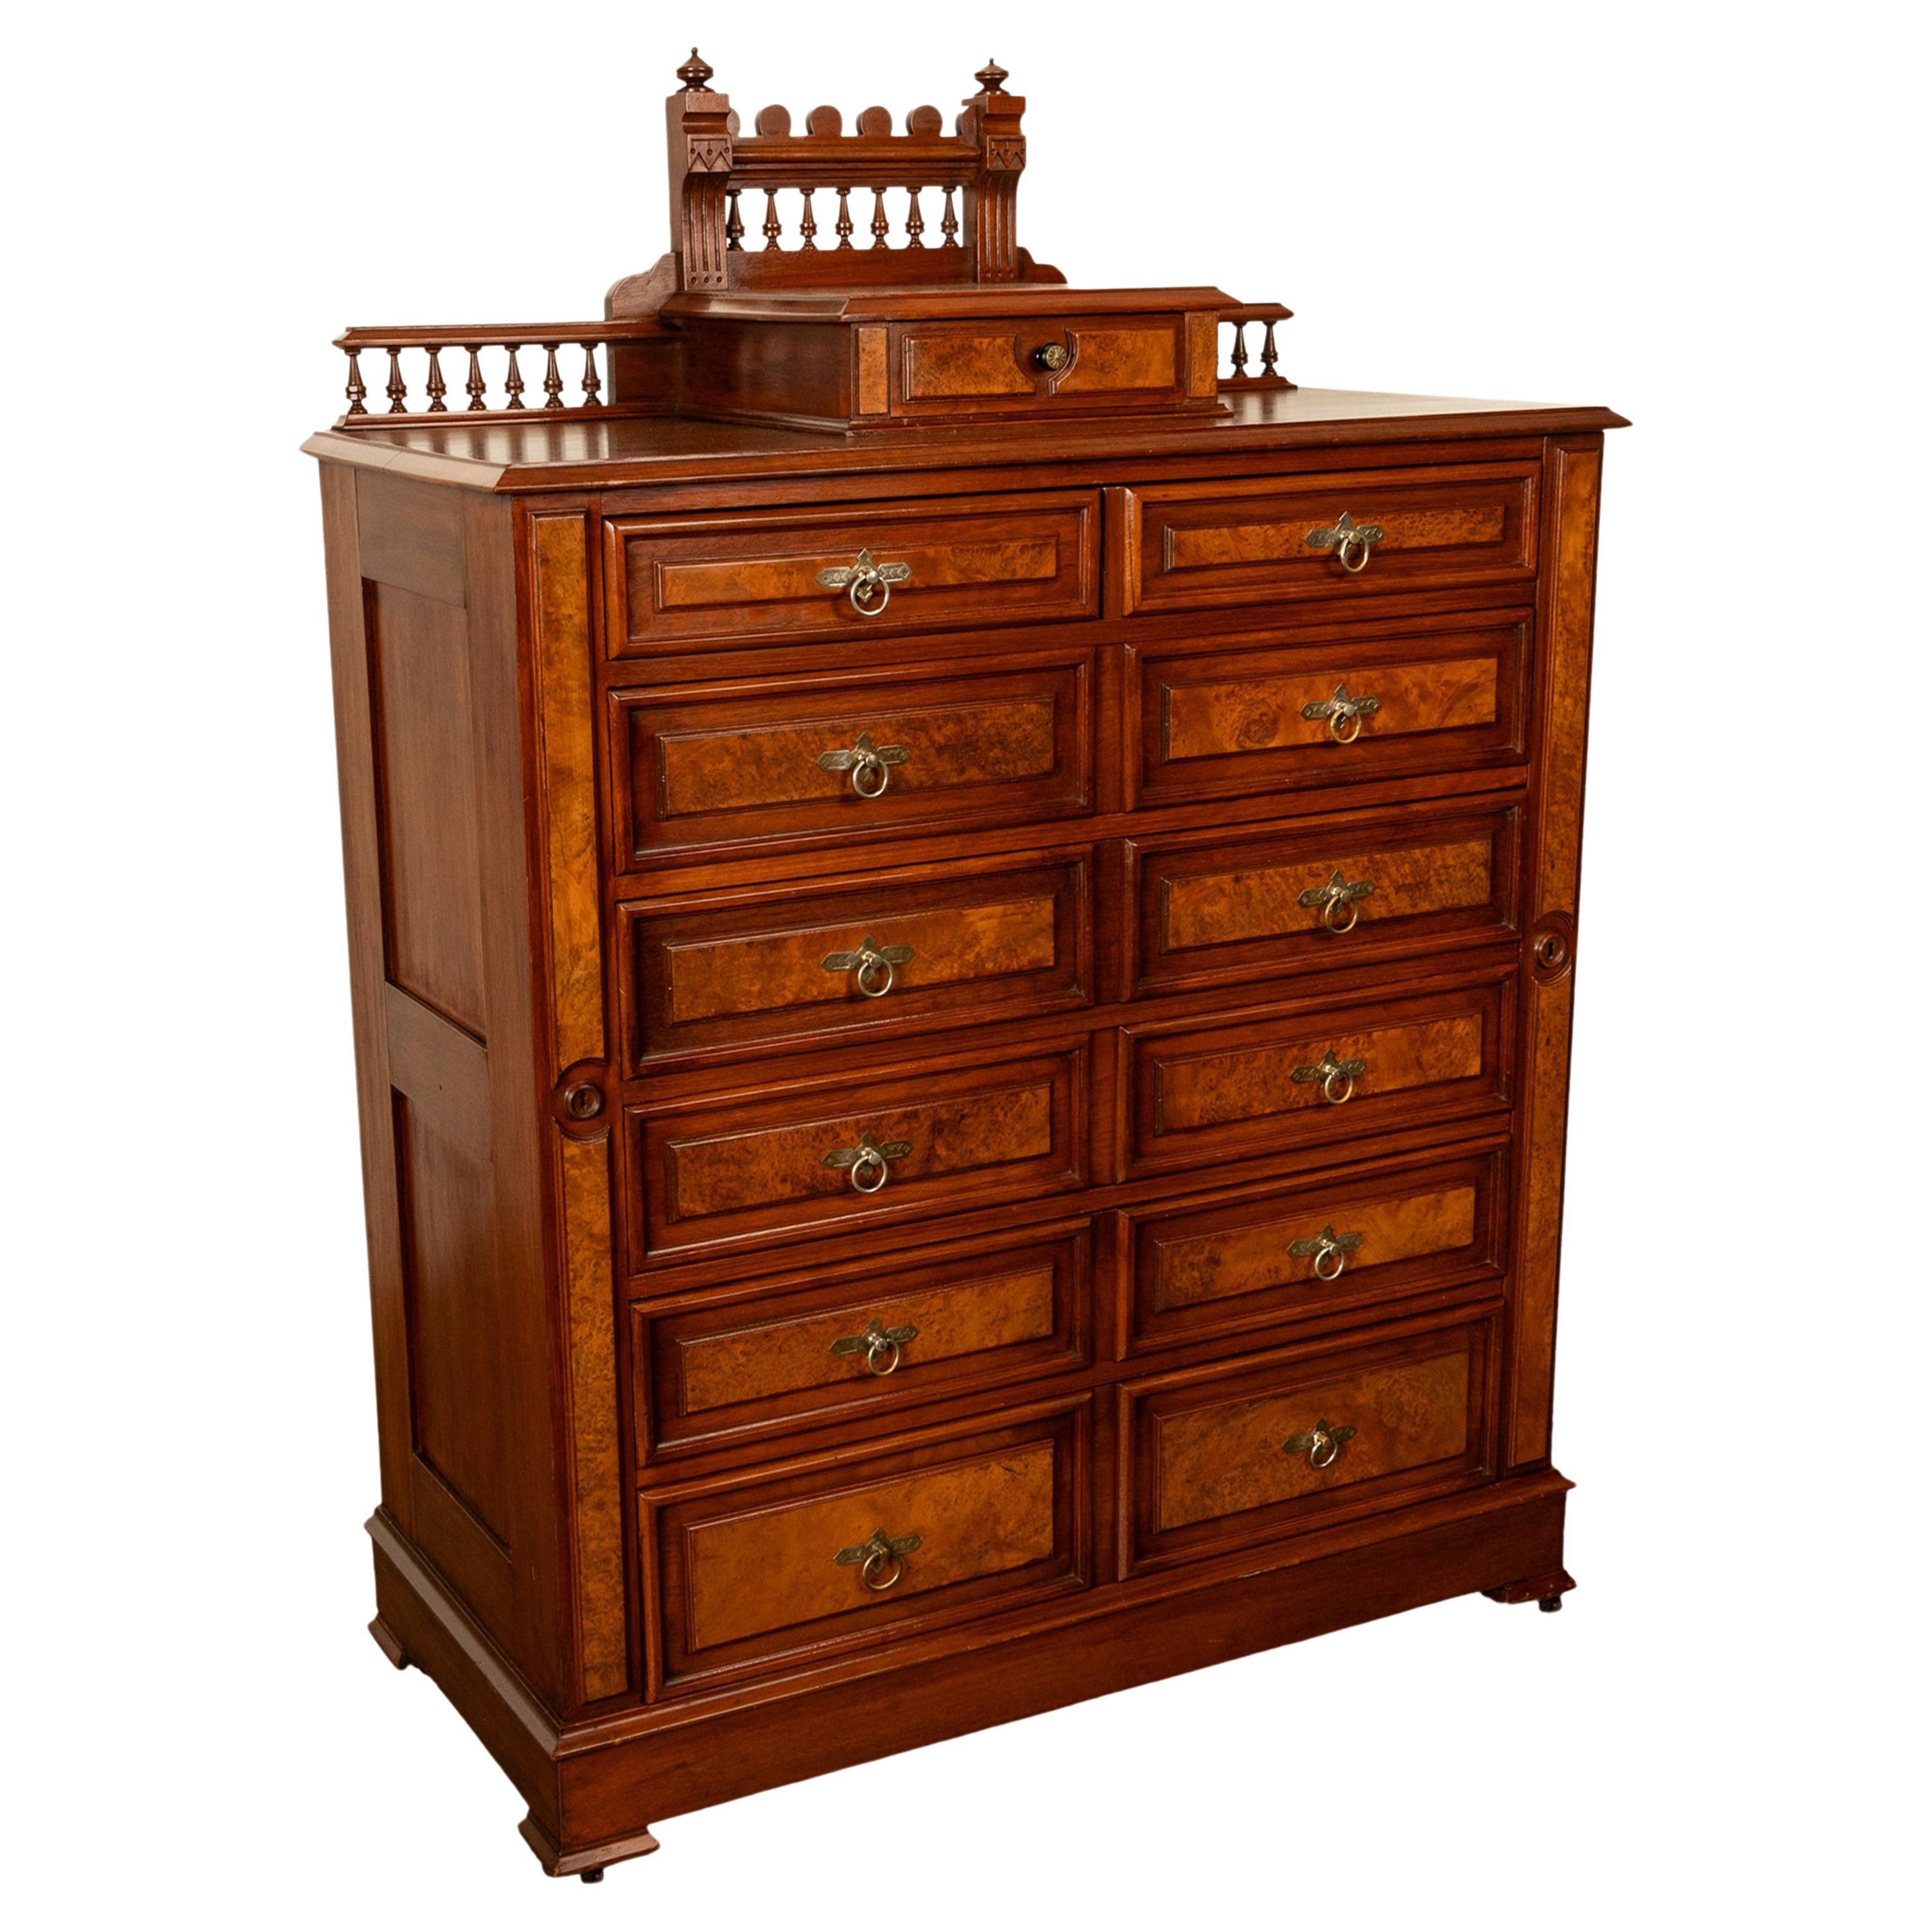 Eastlake Commodes and Chests of Drawers